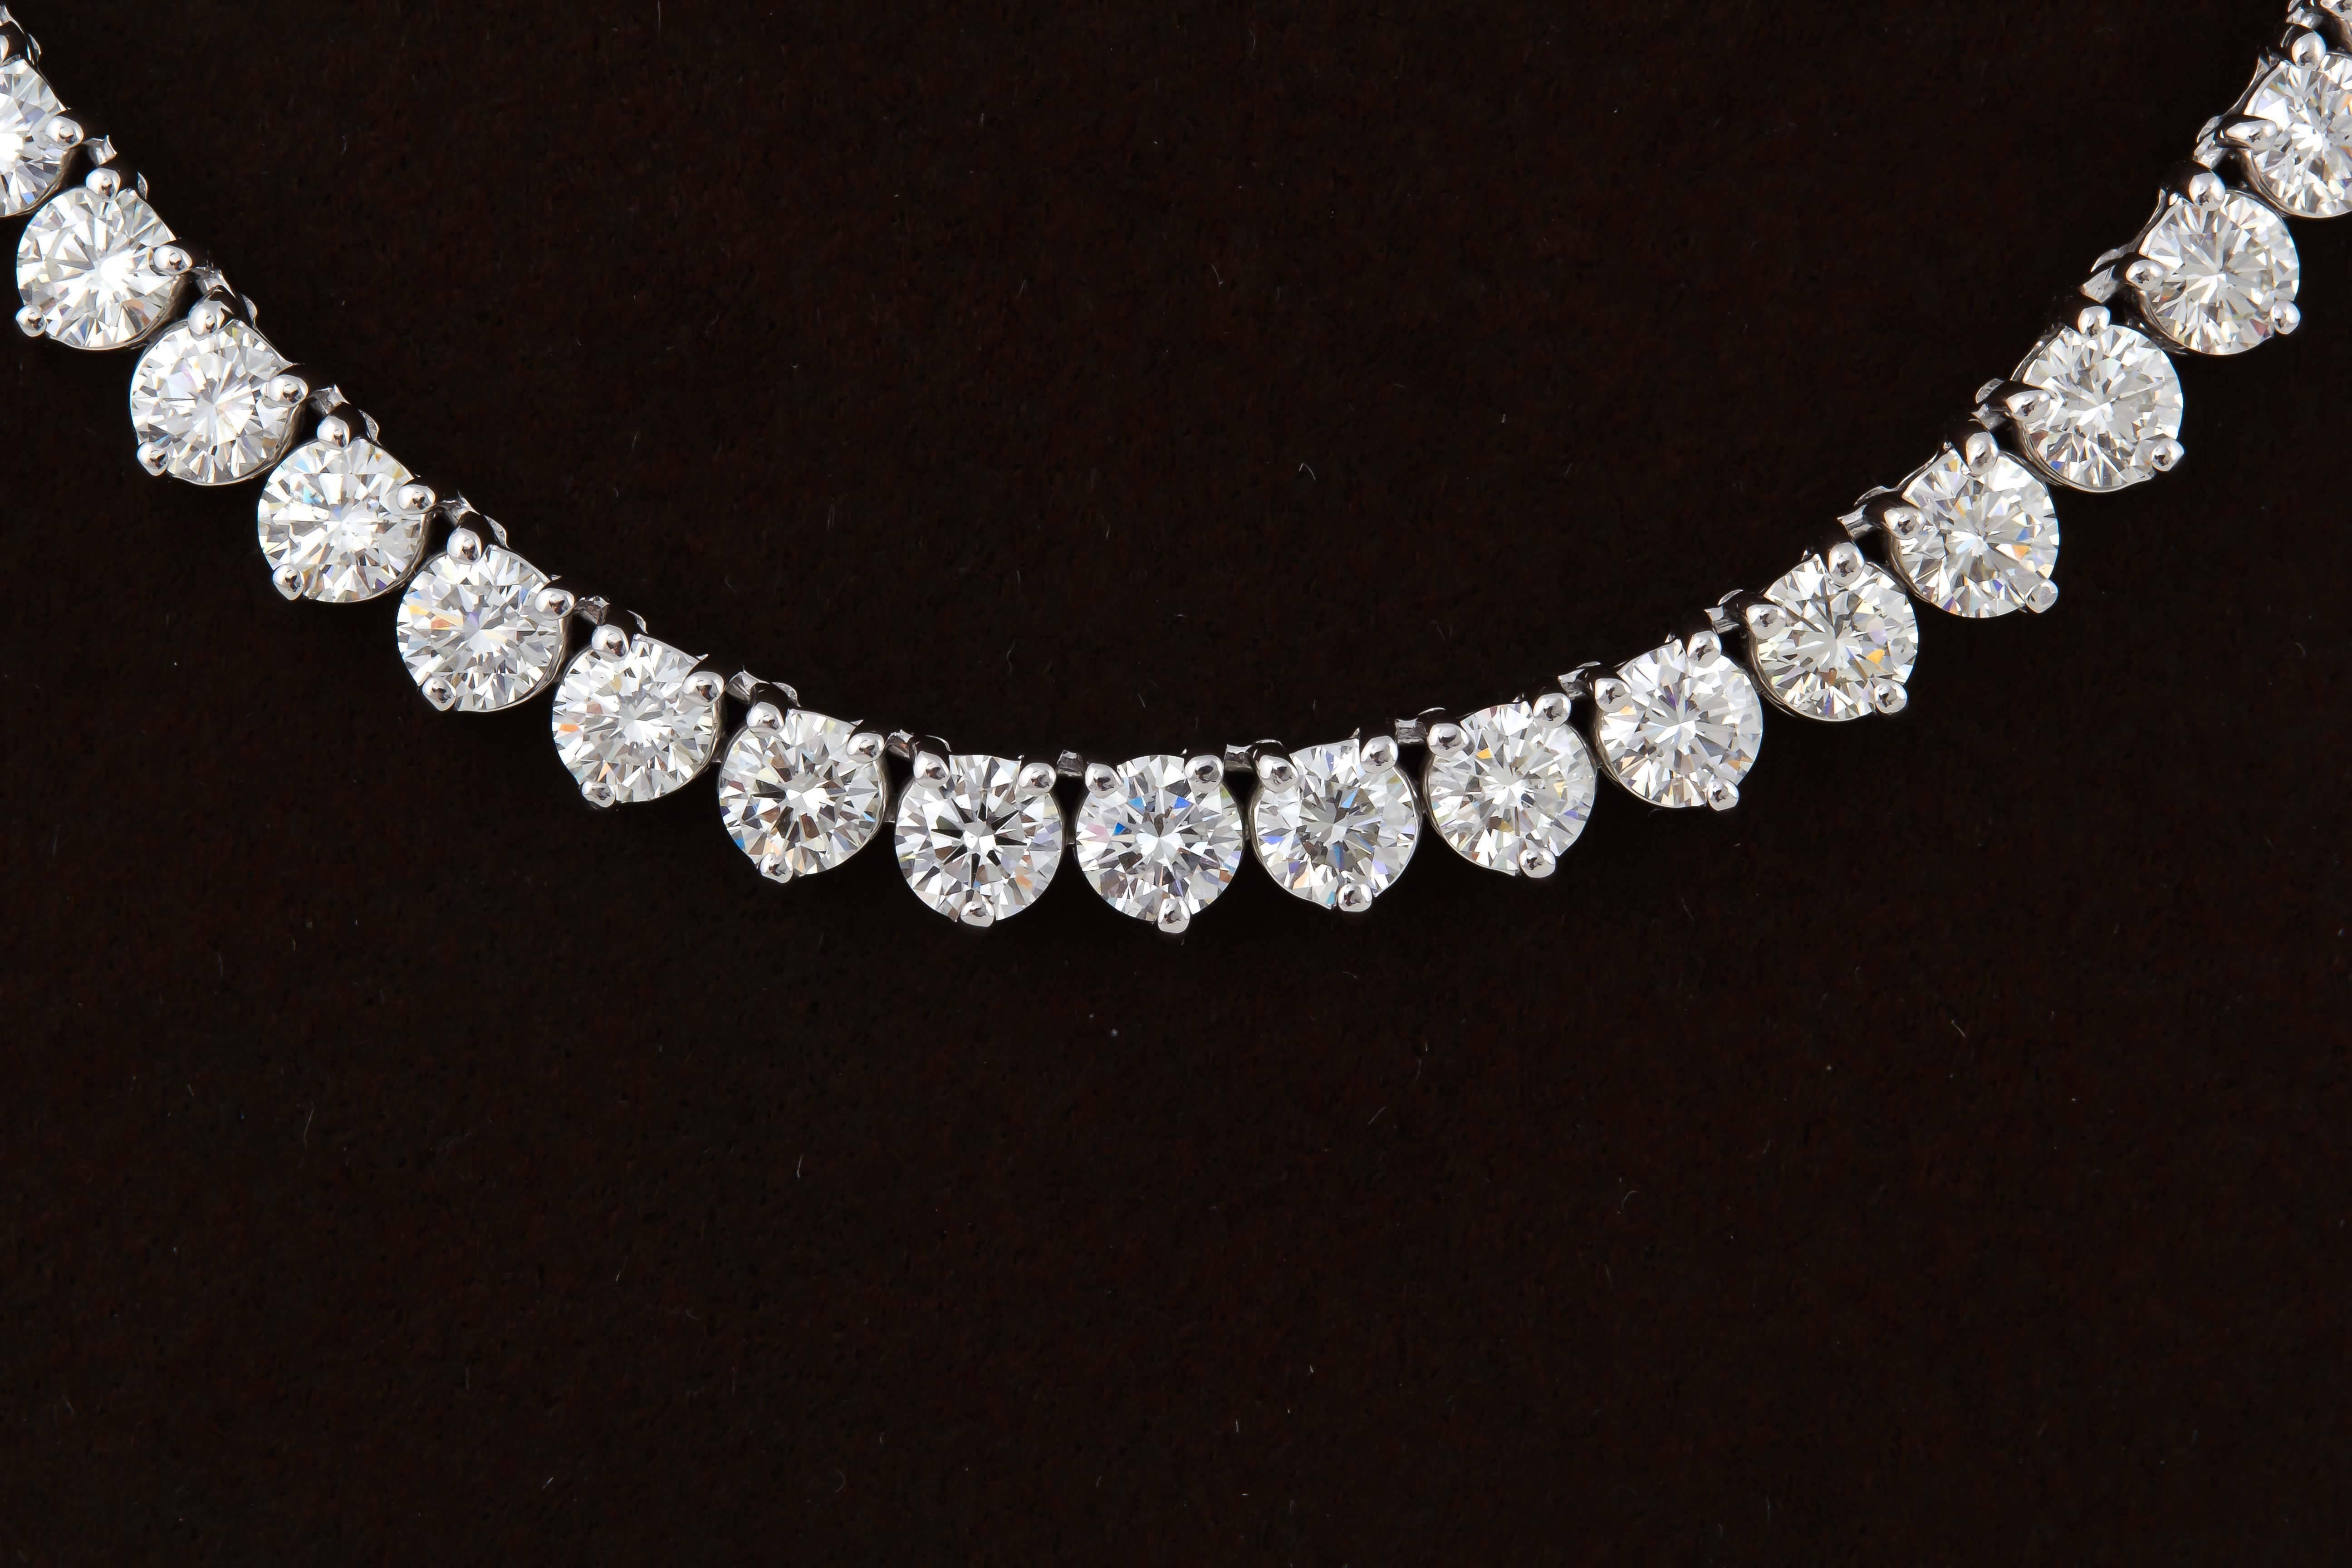 
A high quality diamond tennis necklace.

24.88 carats of E/F color VS clarity round brilliant cut diamonds set in an 18k white gold three prong mounting. 

approximately 17.25 inches

This necklace is full of life and brilliance!

A